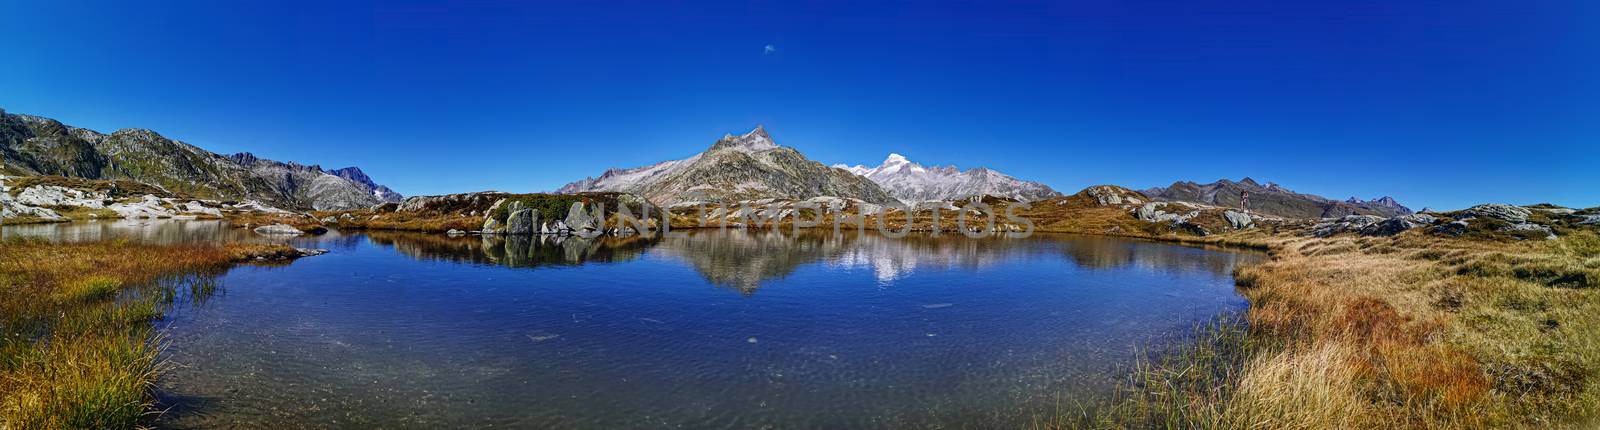 panorama scenery of the swiss alps. Lake at the top of grimsel p by PeterHofstetter